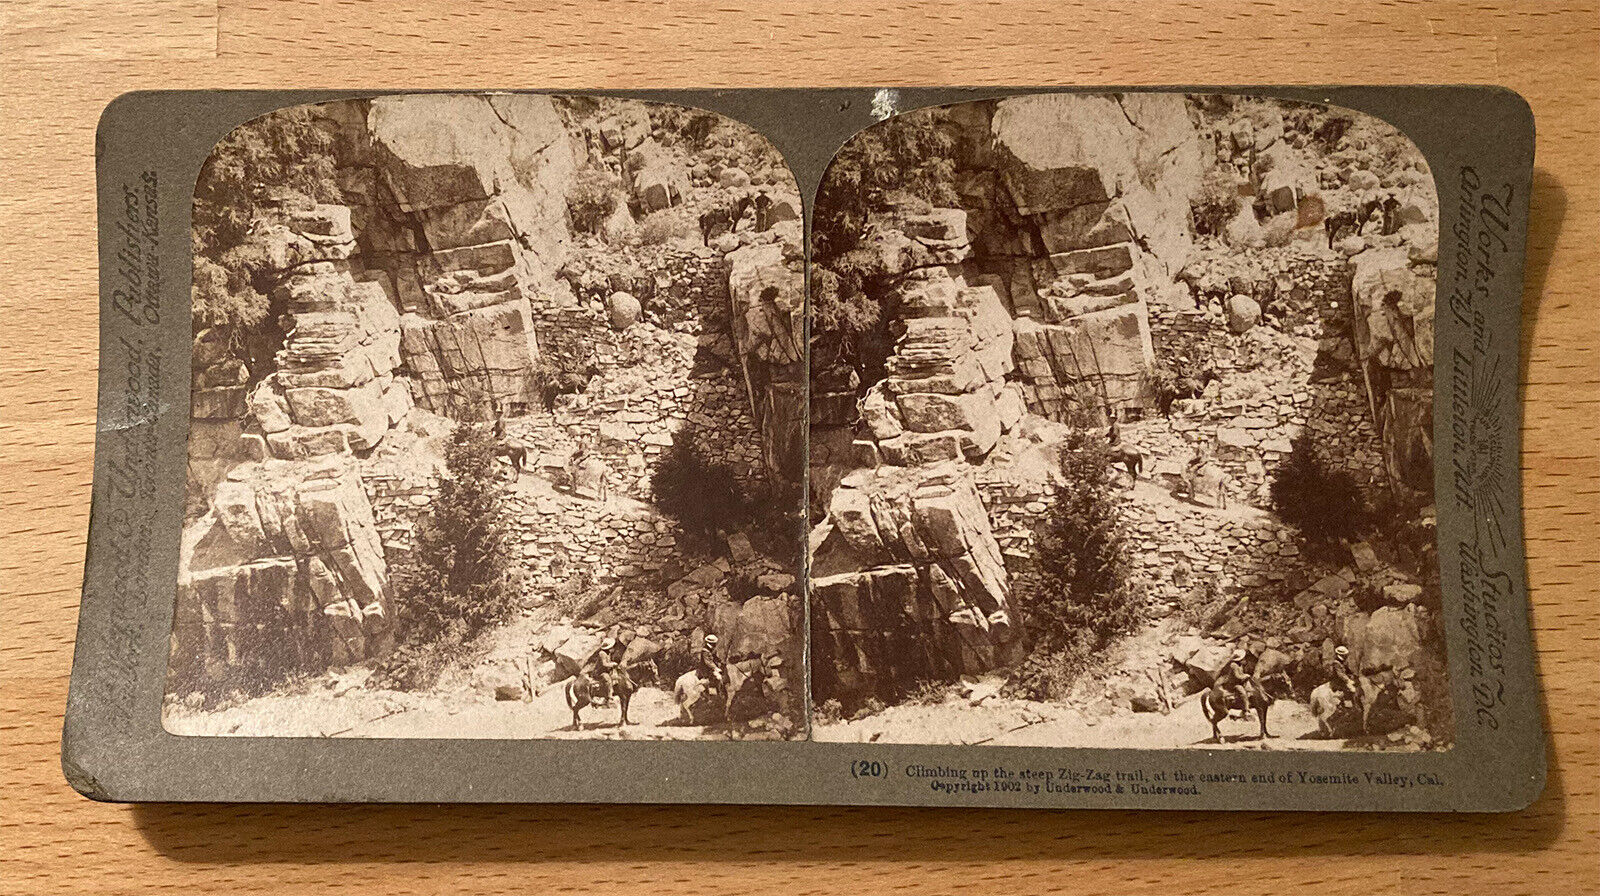 Eastern End of Yosemite Valley Up a Steep Trail – 1902 Stereoview Slide – U.S.A.